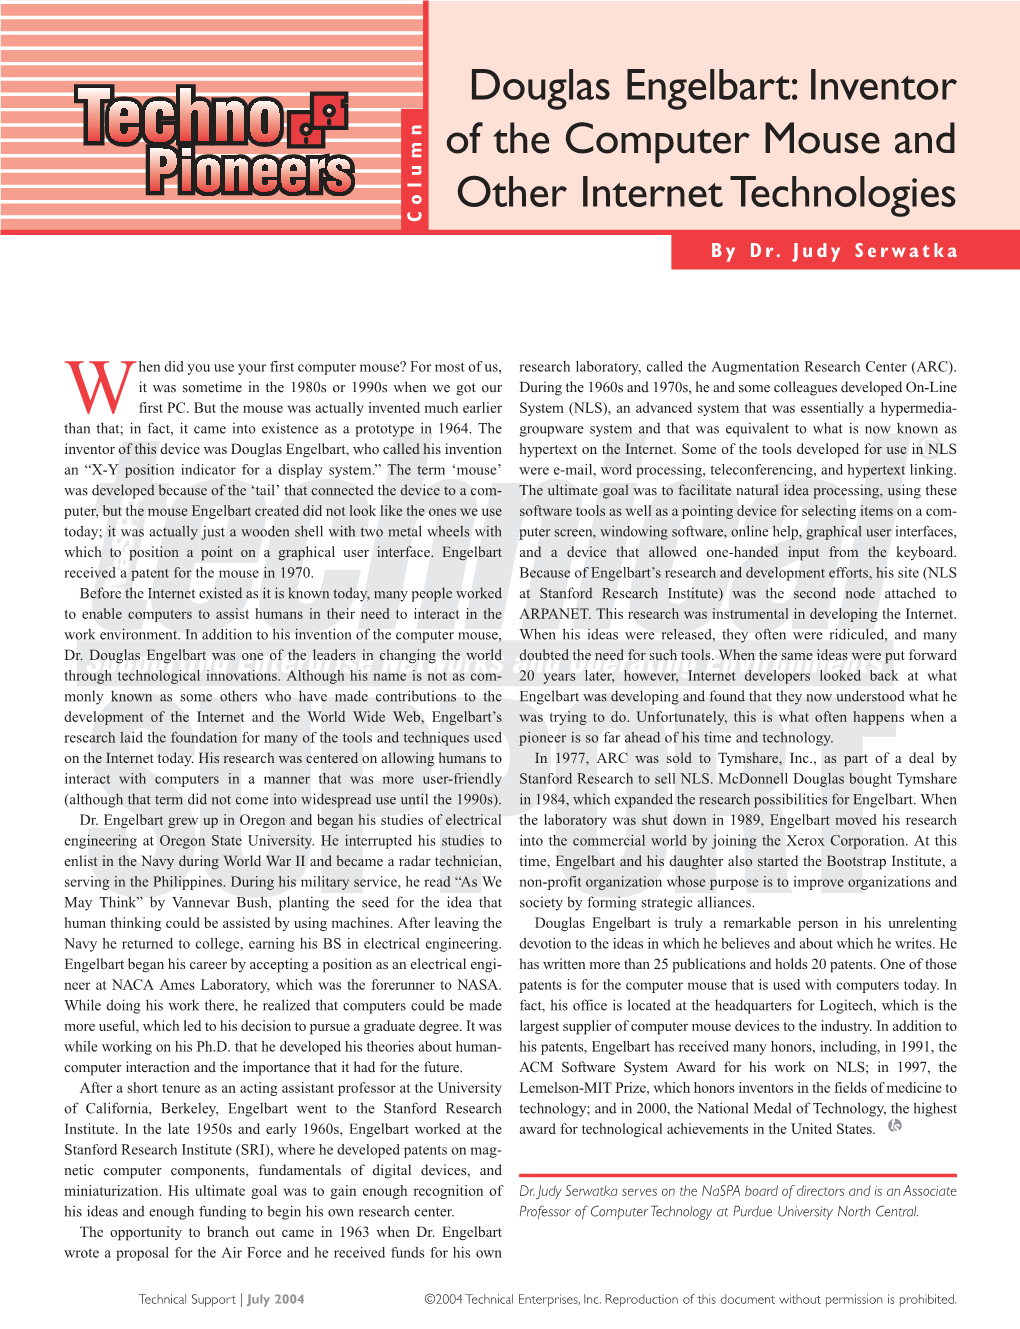 Douglas Engelbart: Inventor of the Computer Mouse and Other Internet Technologies Column by Dr